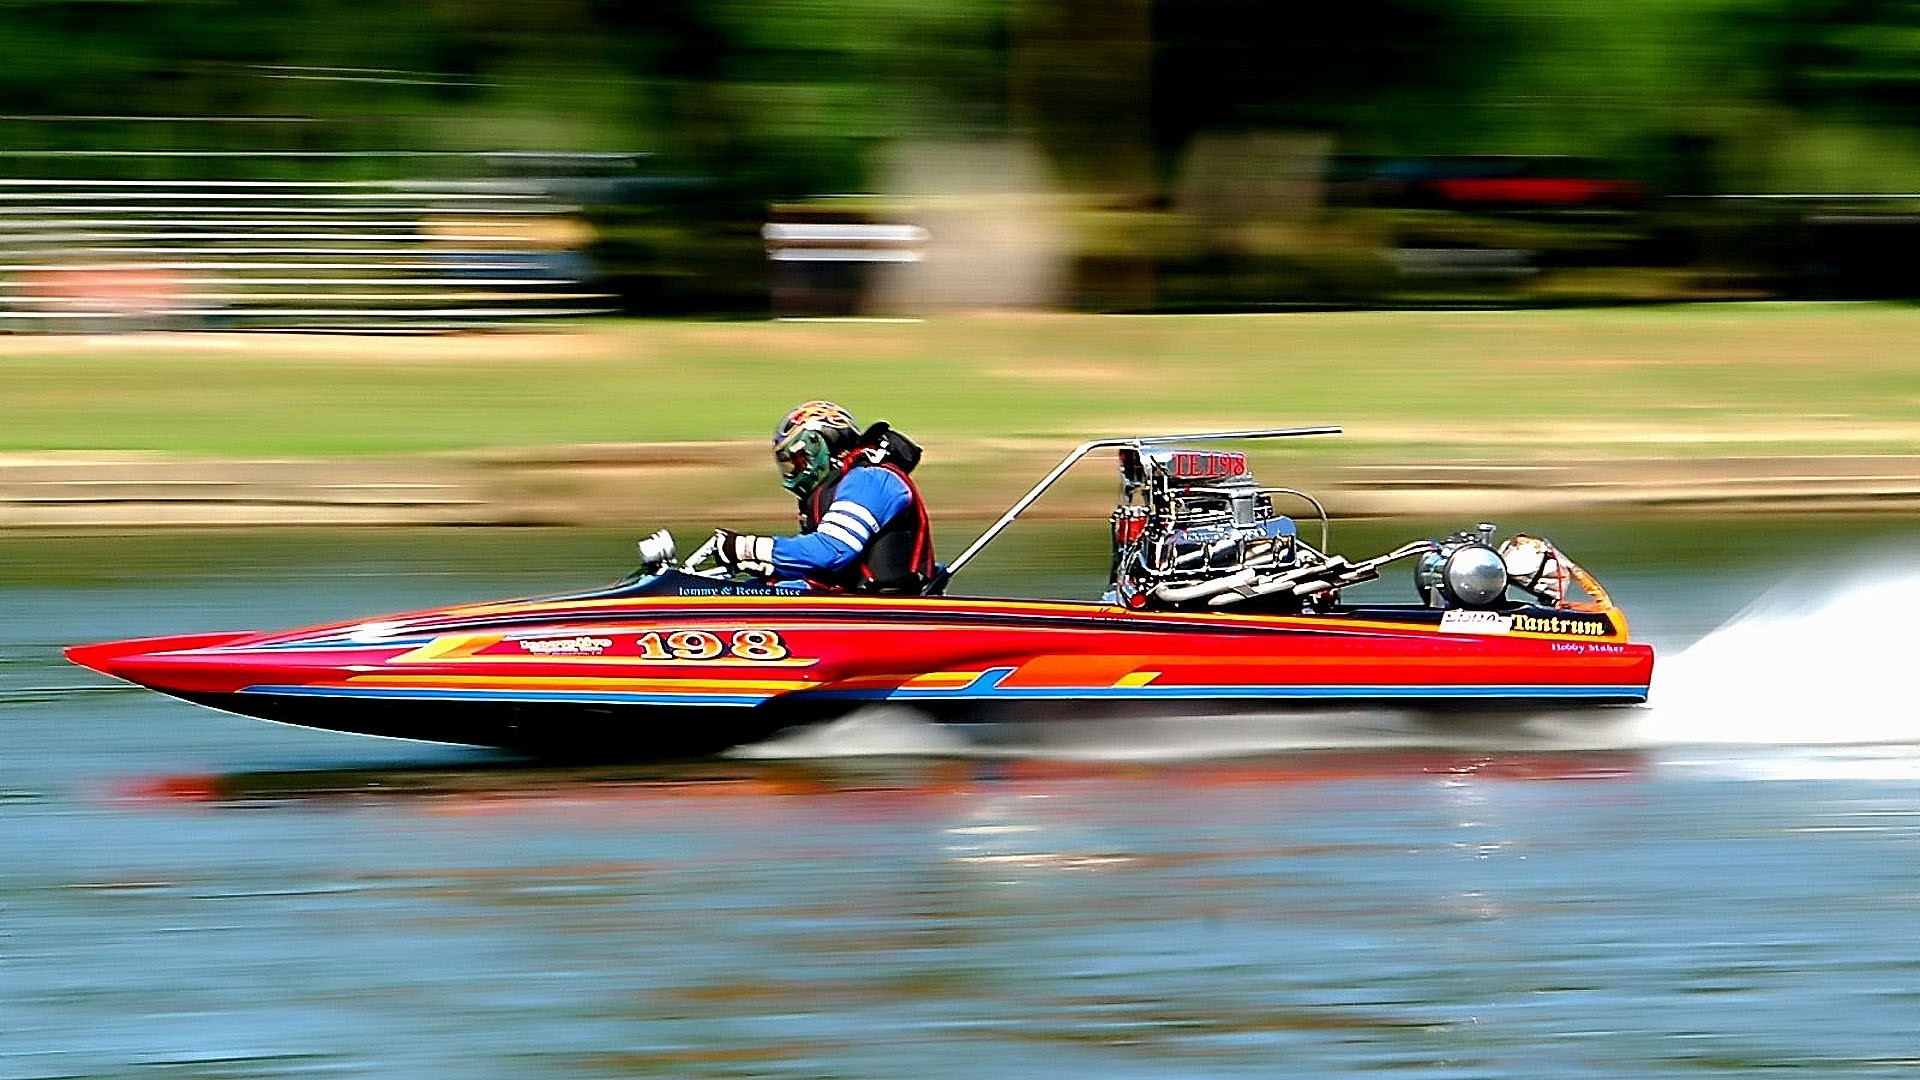 vehicles, Watercrafts, Boats, Ships, Spray, Tail, Color, Speed, Motion, People, Uniform, Race, Racing, Engine, Chrome, Blower, Blown, Muscle, Hot, Rod, Lakes, Park, Shore, Grass Wallpaper